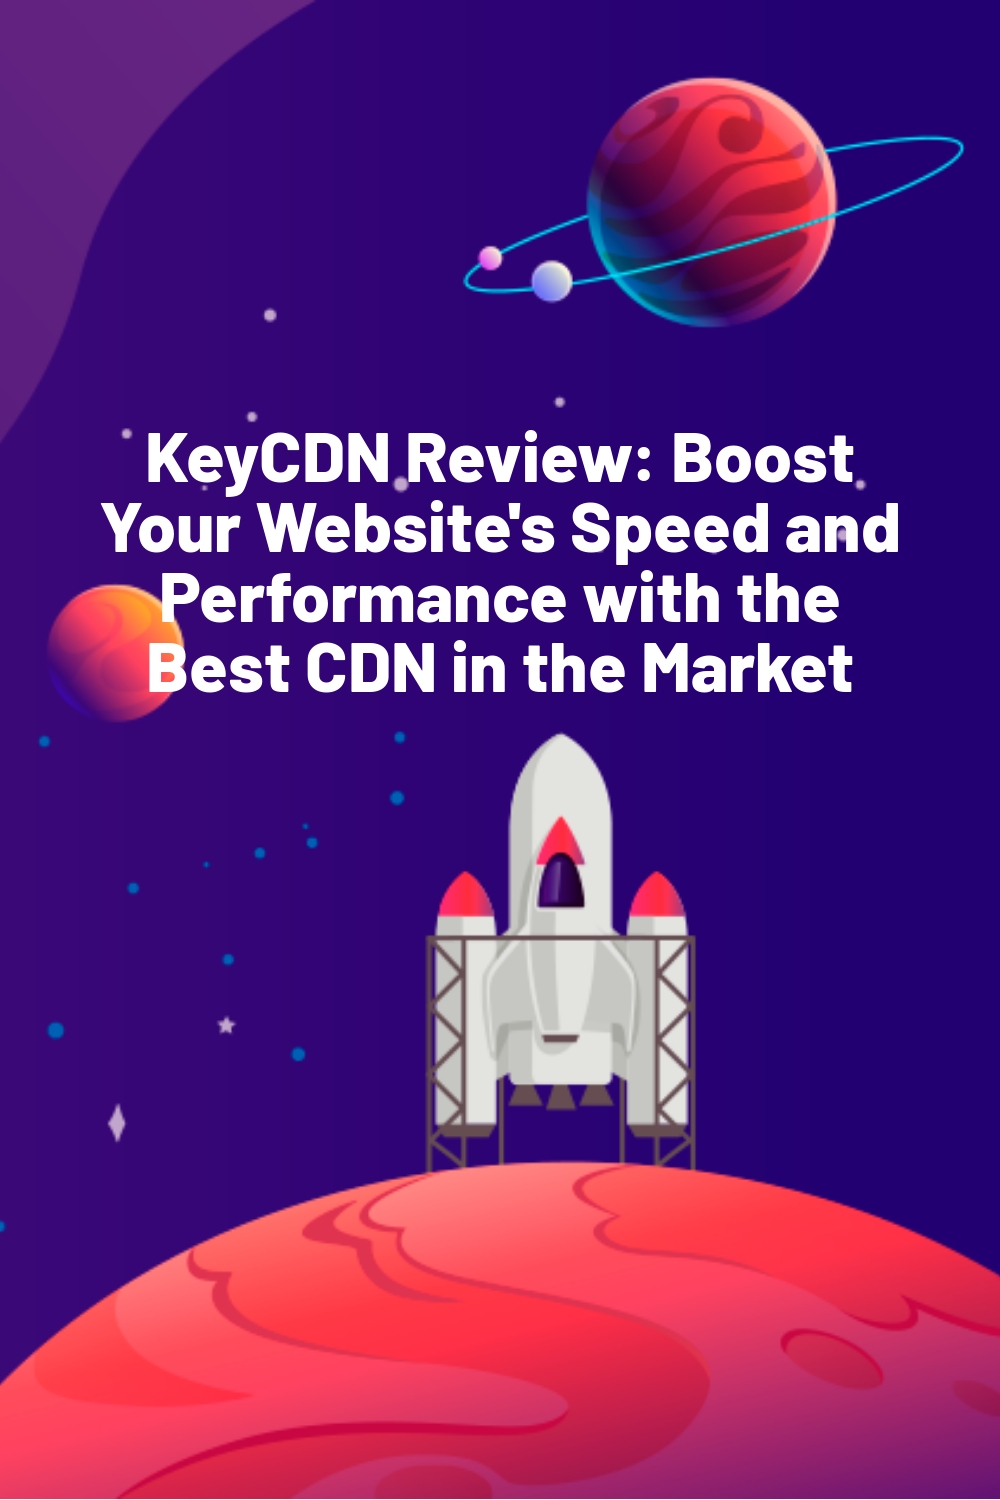 KeyCDN Review: Boost Your Website’s Speed and Performance with the Best CDN in the Market